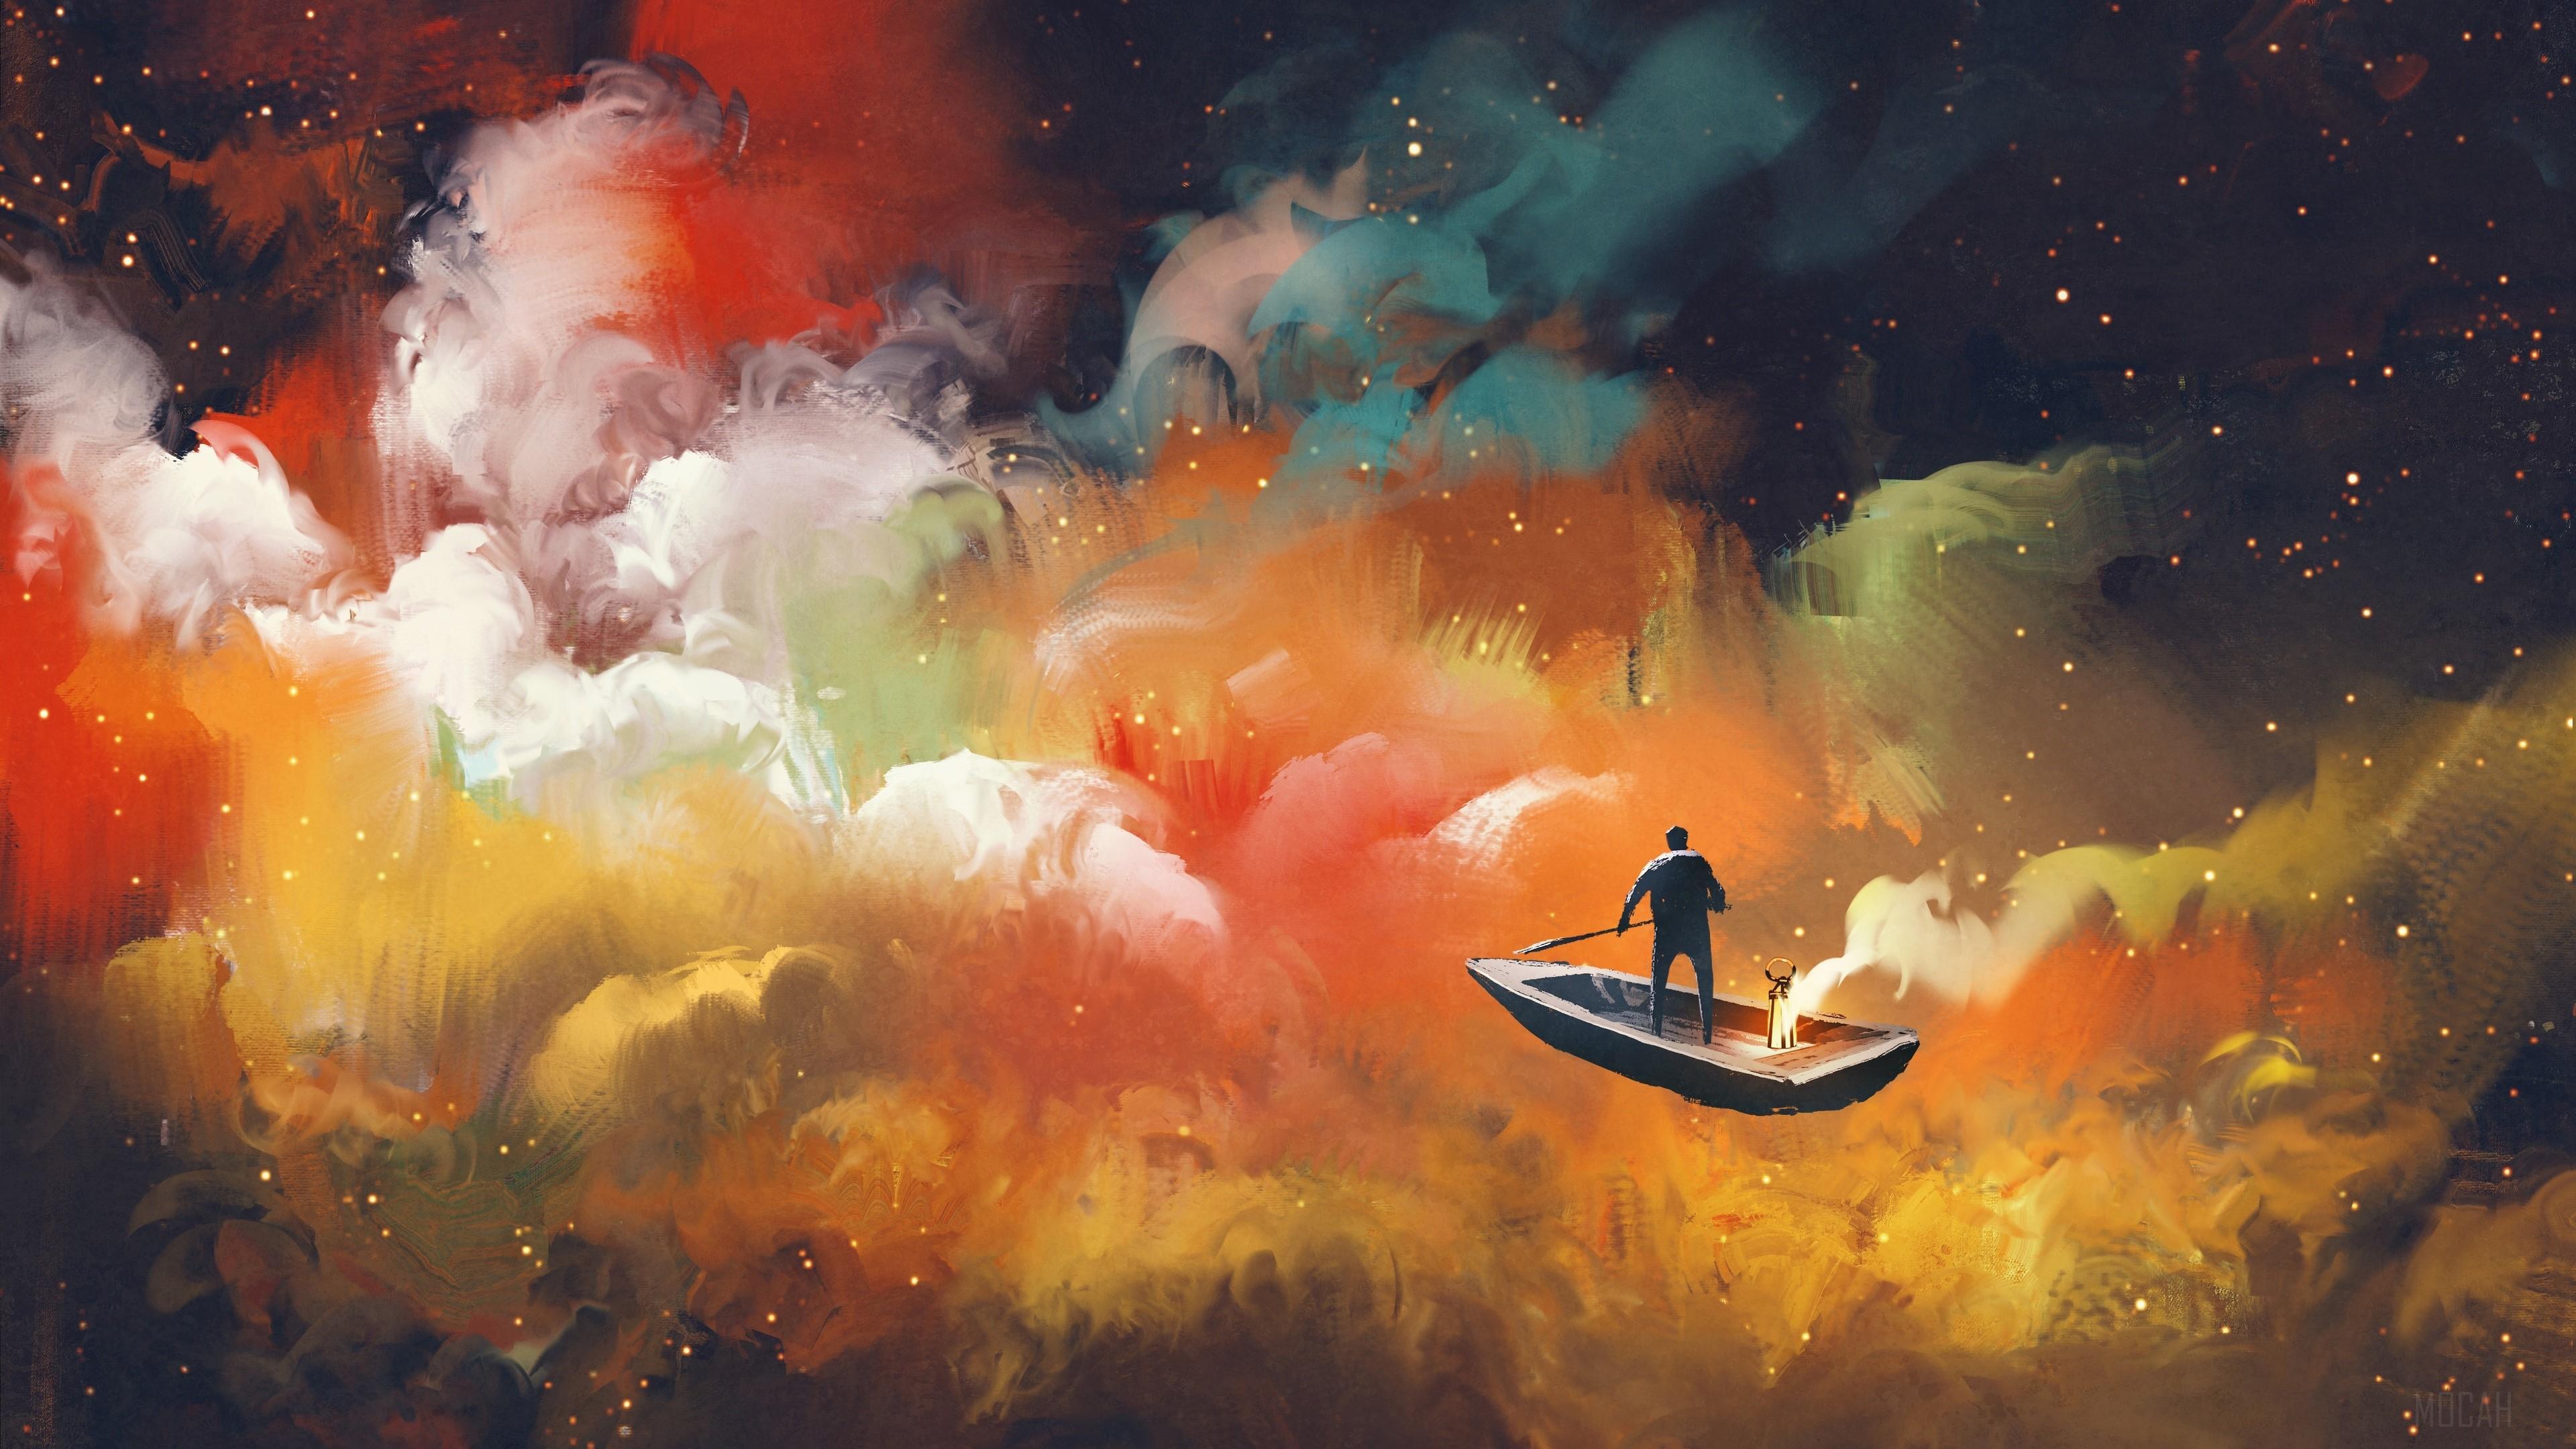 HD wallpaper, Artistic Cloud Boat Outer Space Floating 4K